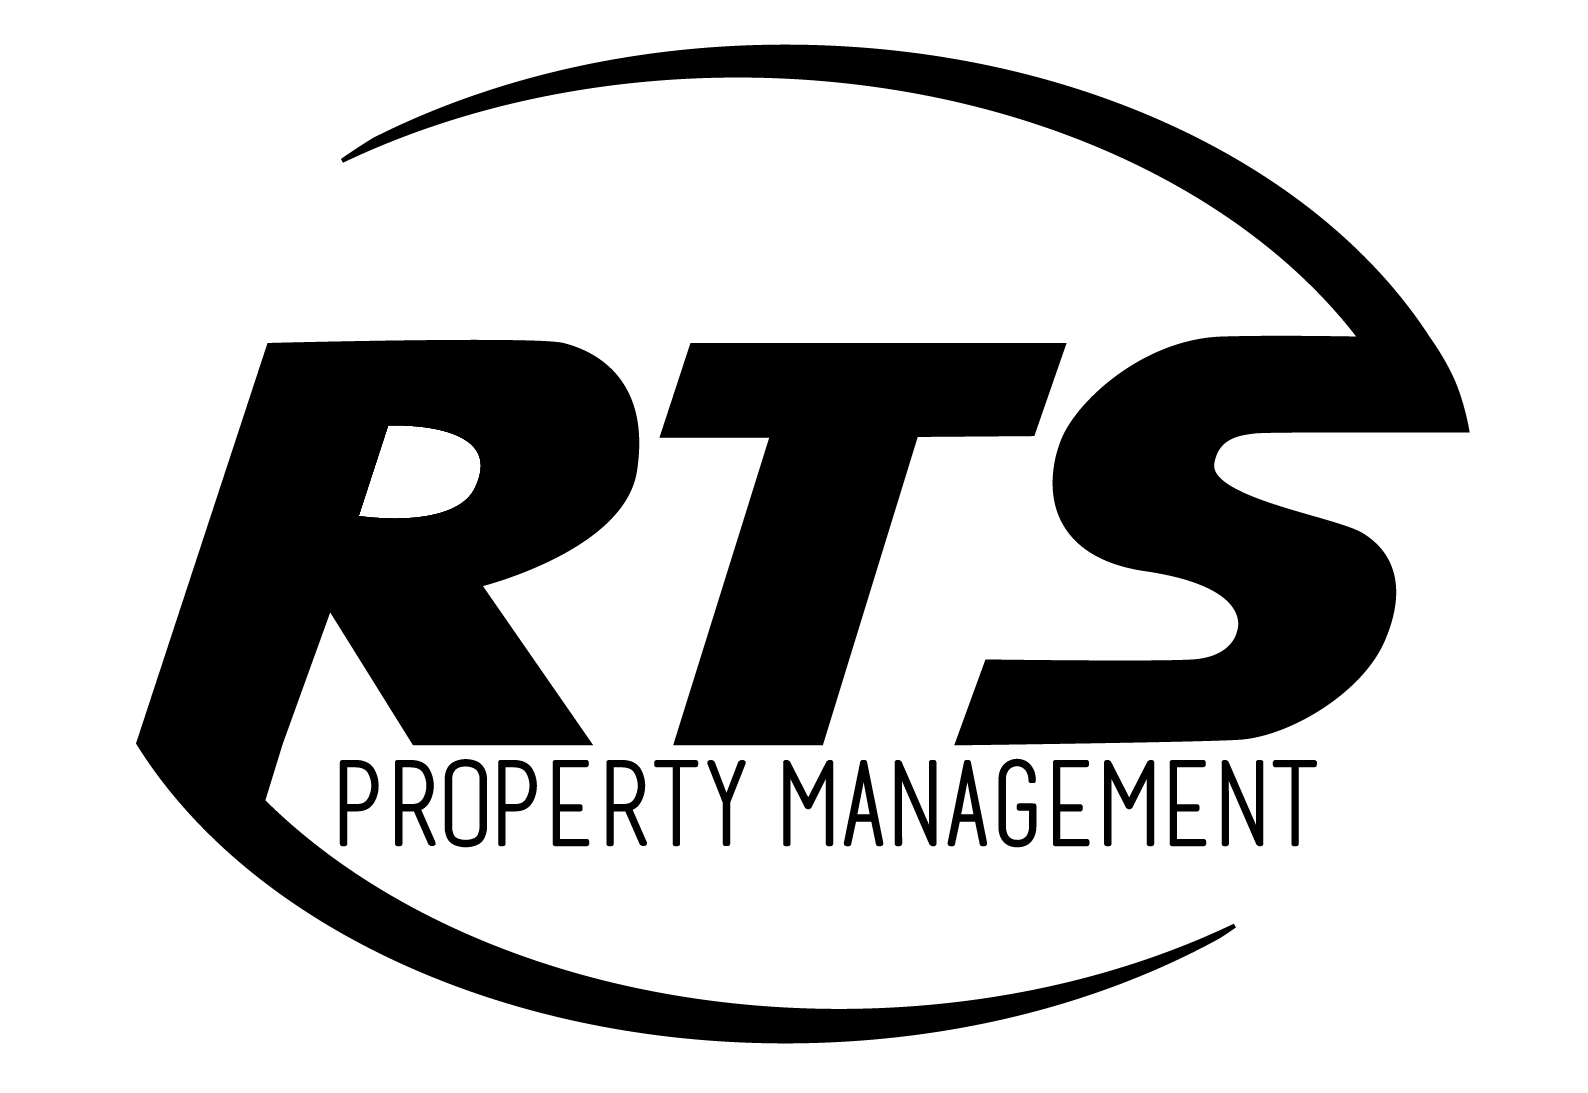 The logo for rts property management is black and white.